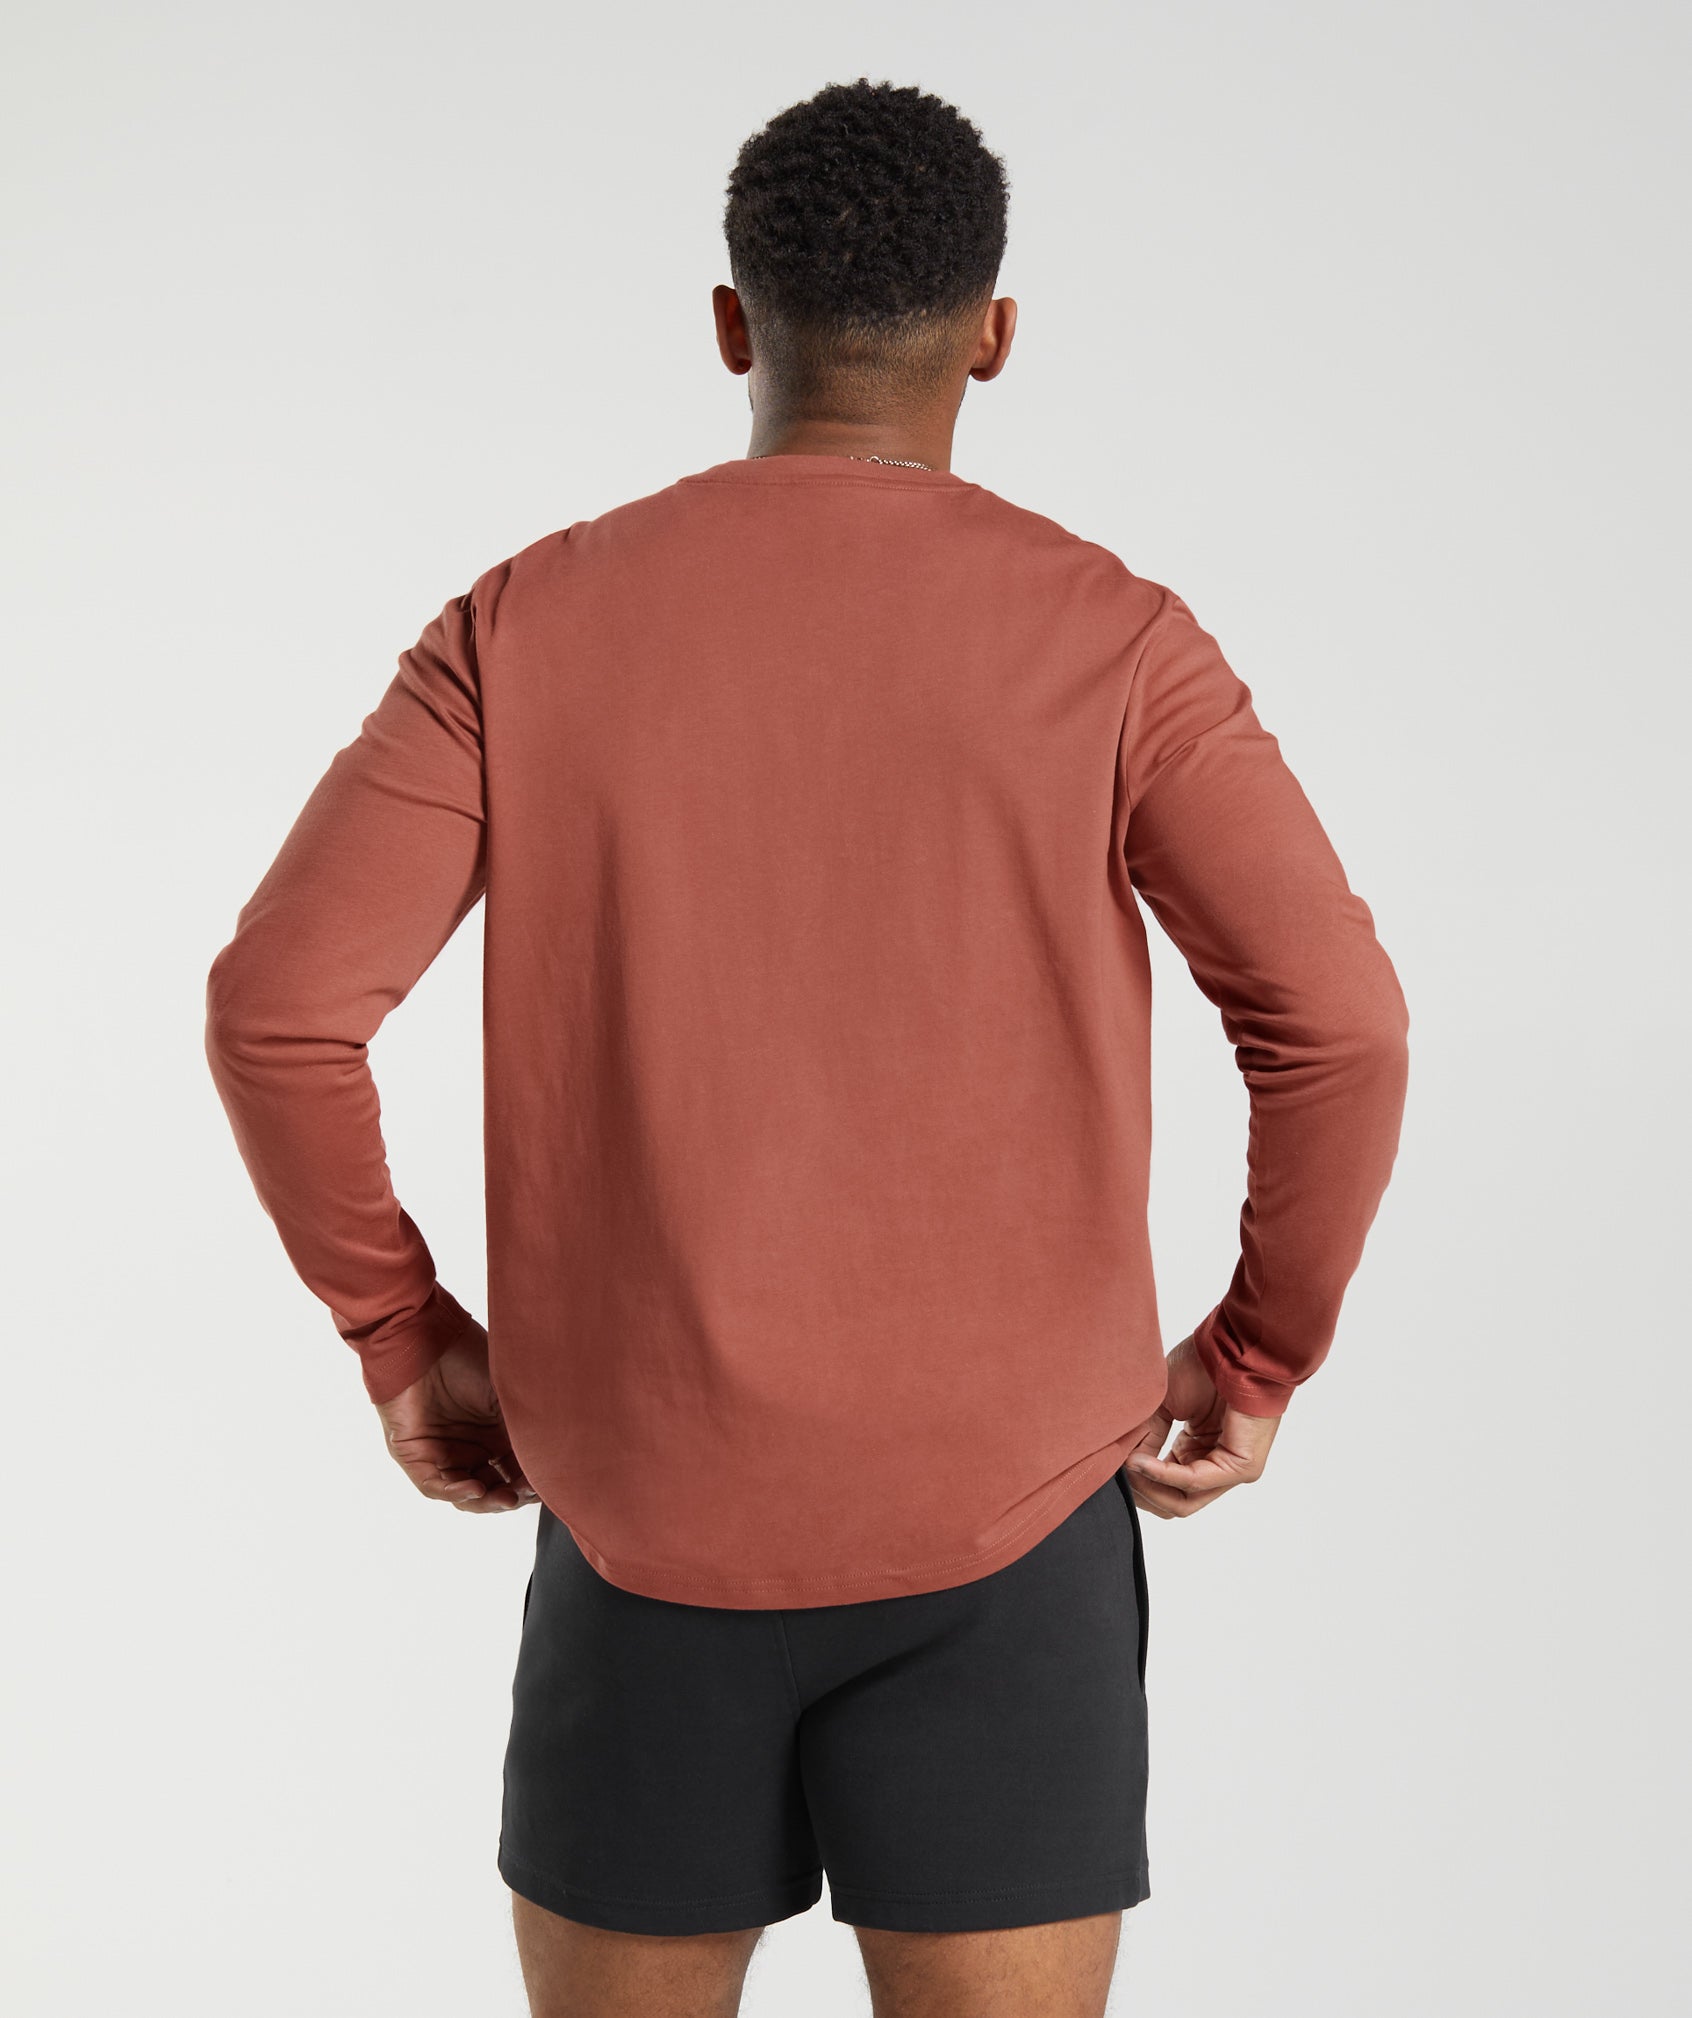 Crest Long Sleeve T-Shirt in Persimmon Red - view 2